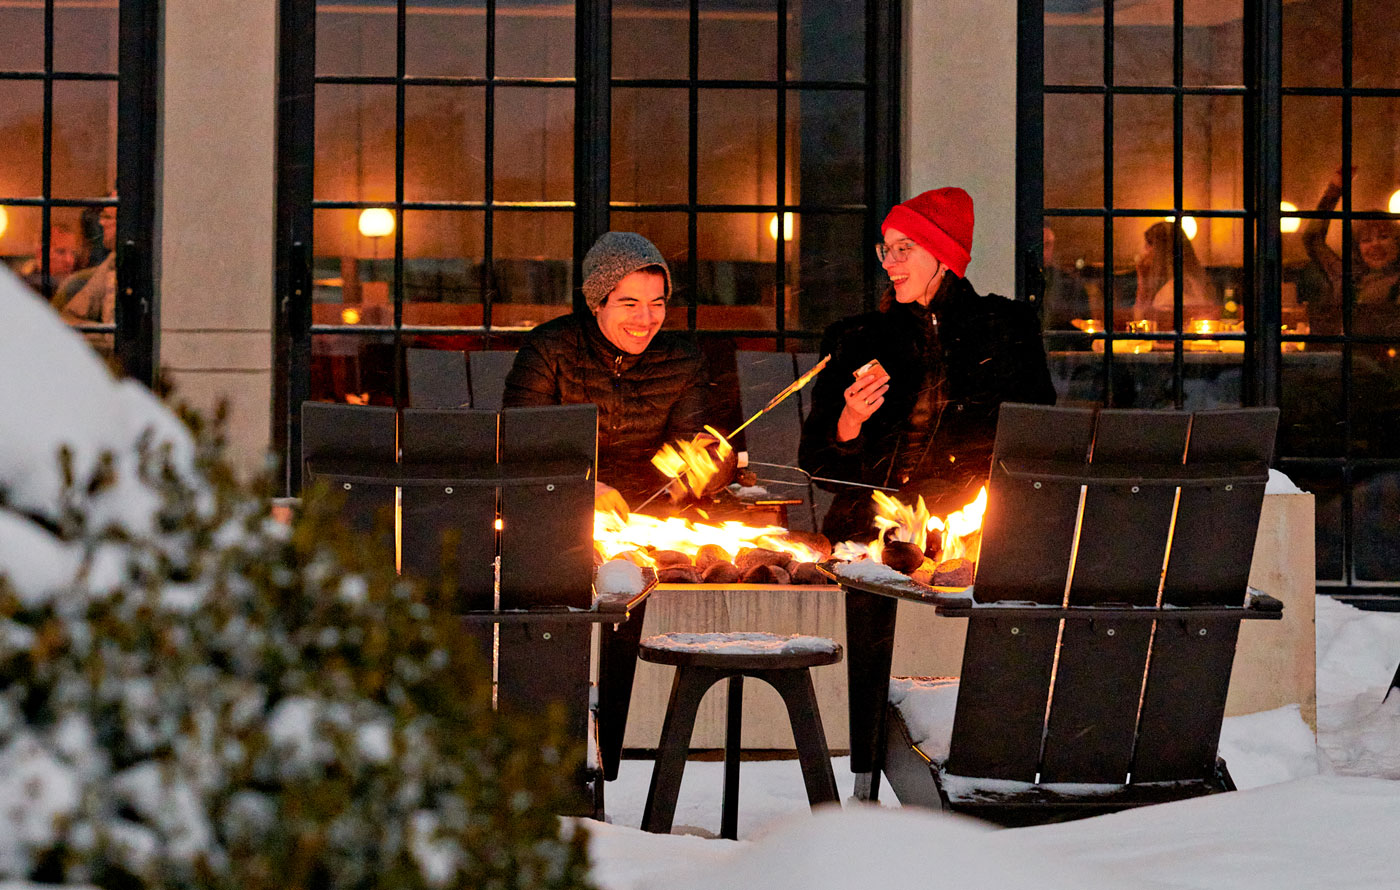 A couple roasting marshmallows for evening s'mores at the outdoor firepit at The Harbor Grand Hotel in New Buffalo, Michigan.